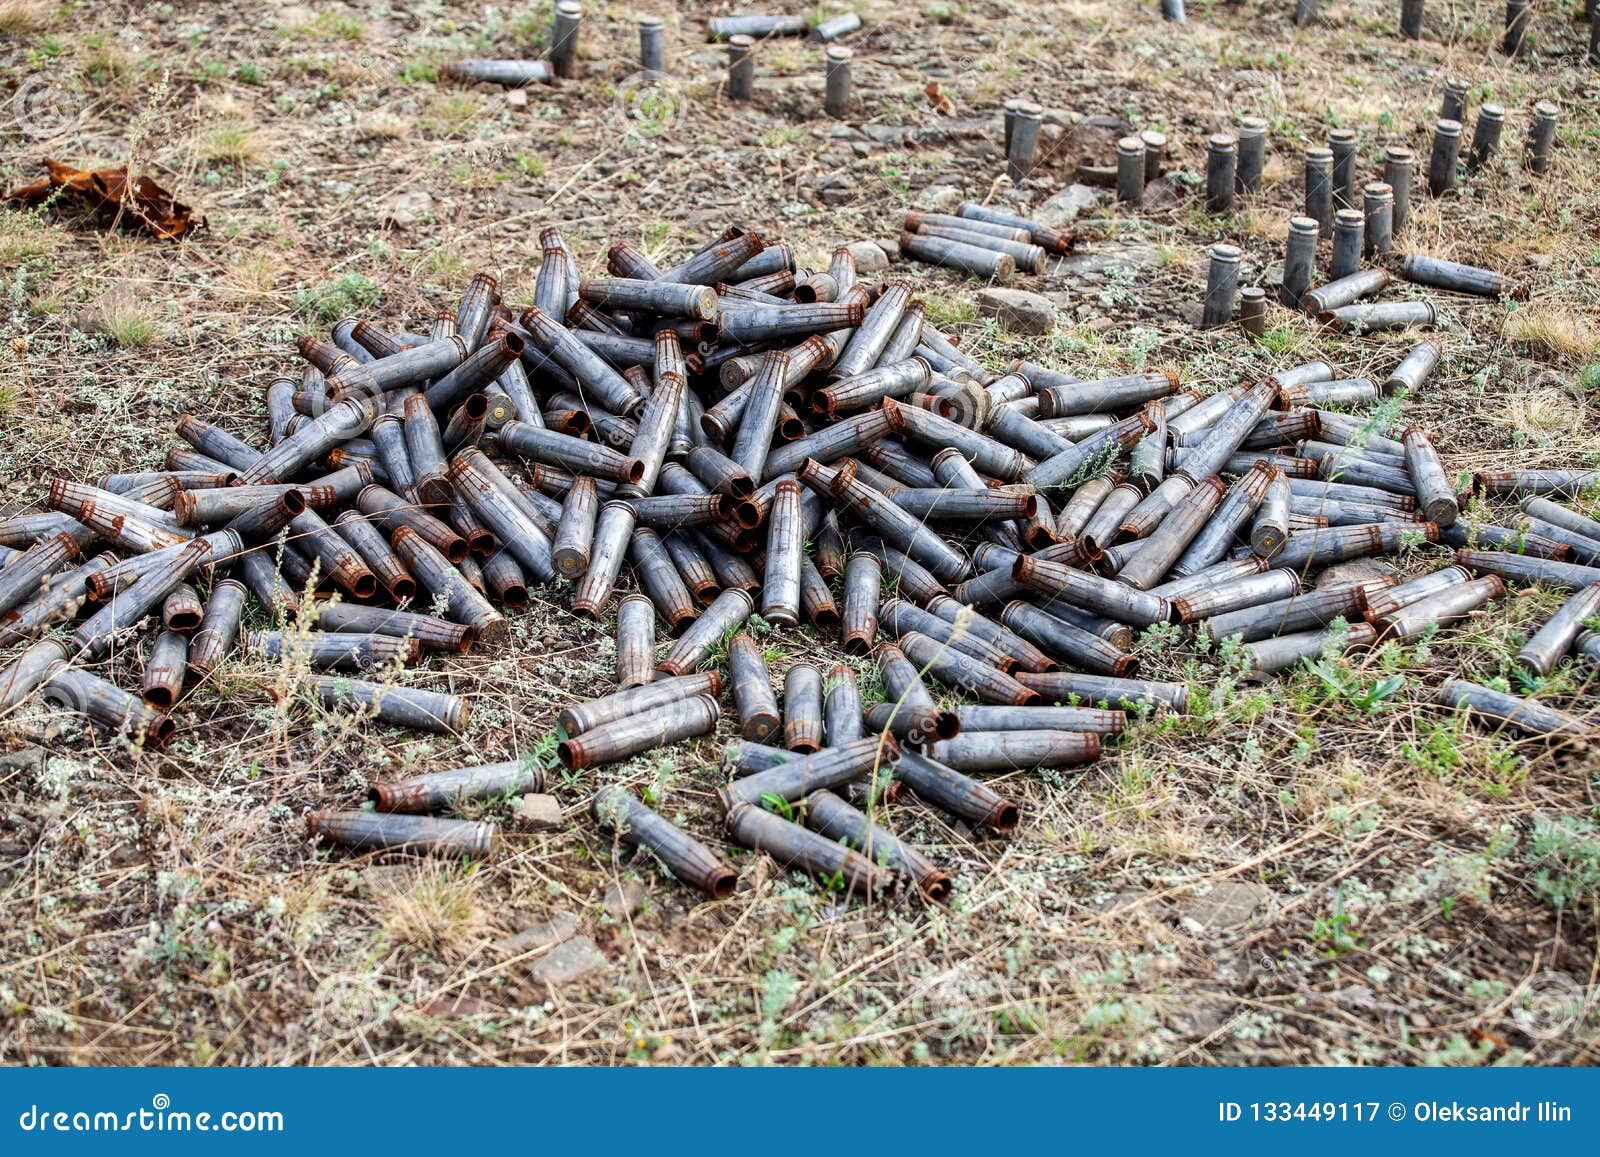 used cartridges for large-caliber weapons, war actions aftermath, ukraine and donbass conflict